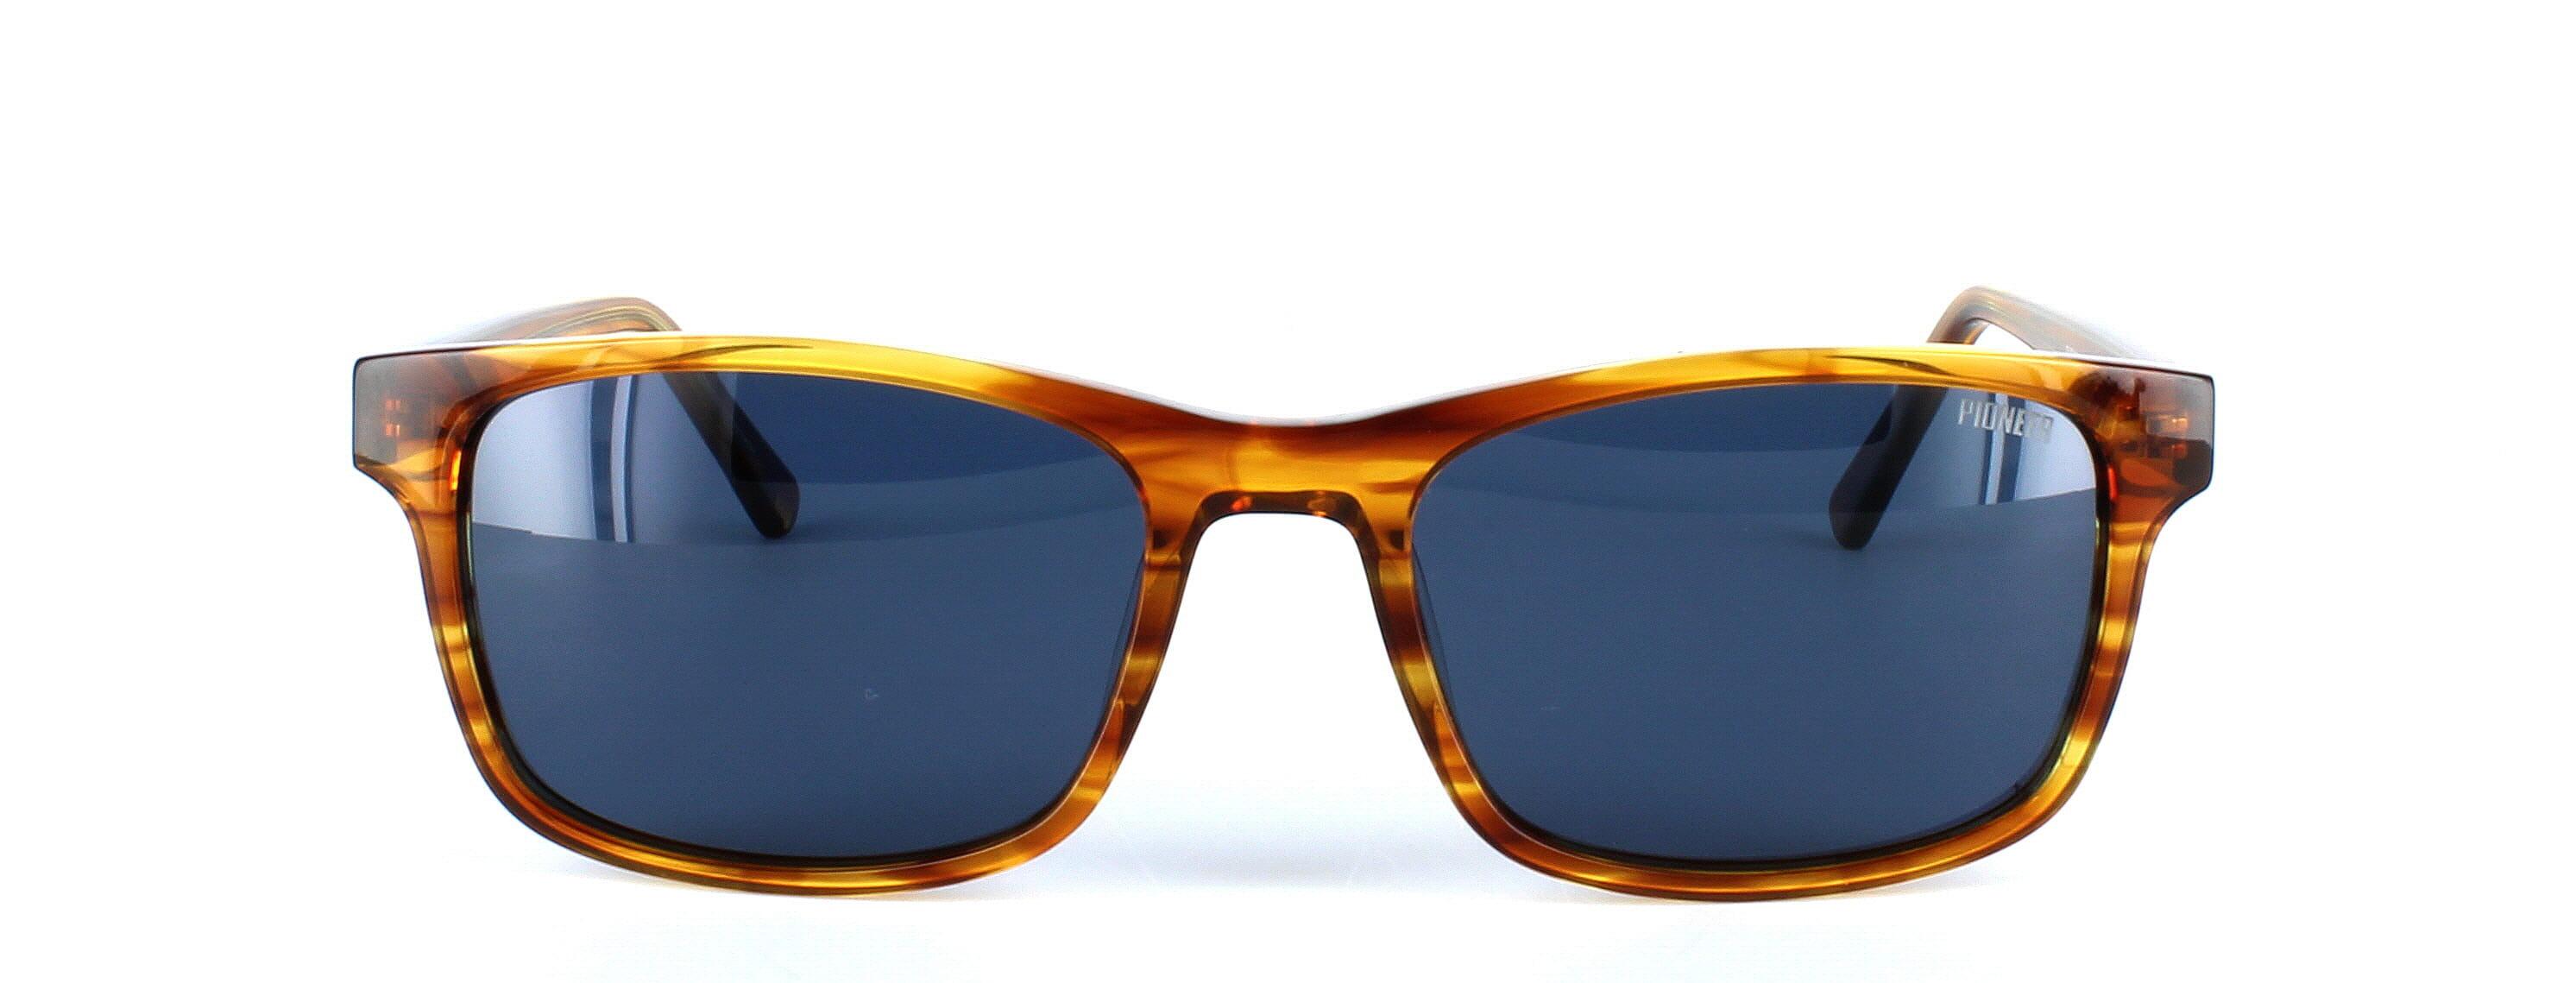 Rocco - Unisex acetate prescription sunglasses in tortoise - choose green, brown or grey tints inc in the price - image view 5